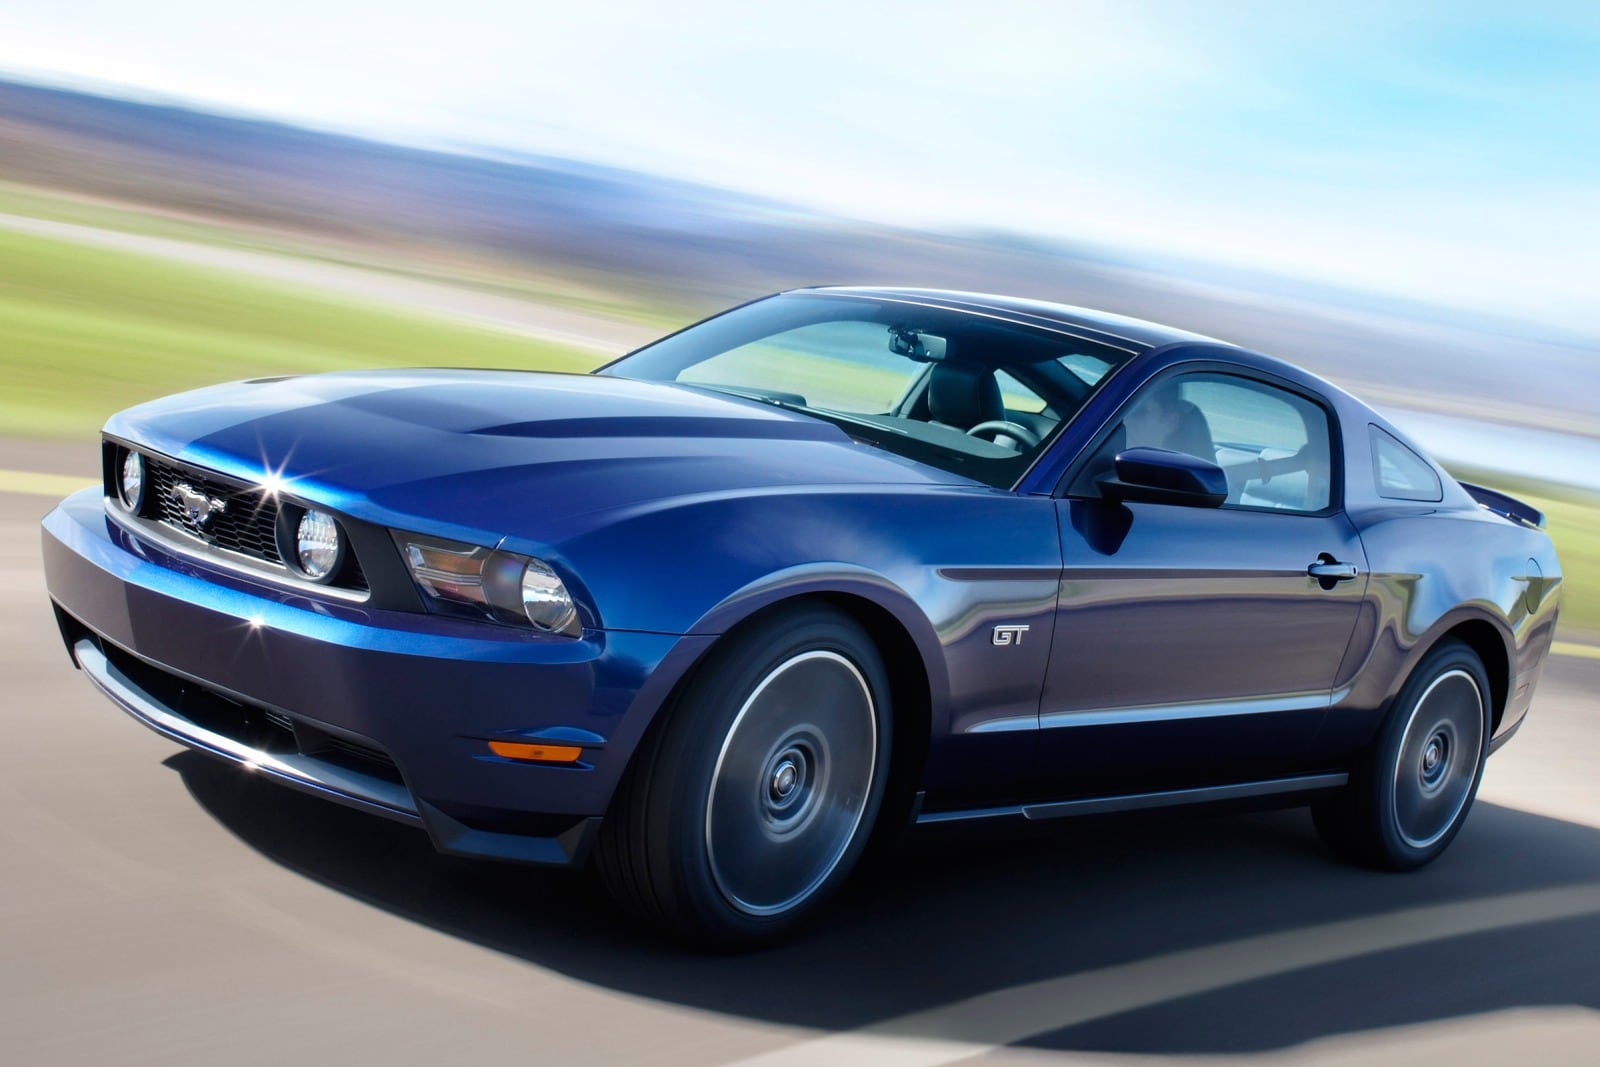 Used 2010 Ford Mustang Coupe Review | Edmunds